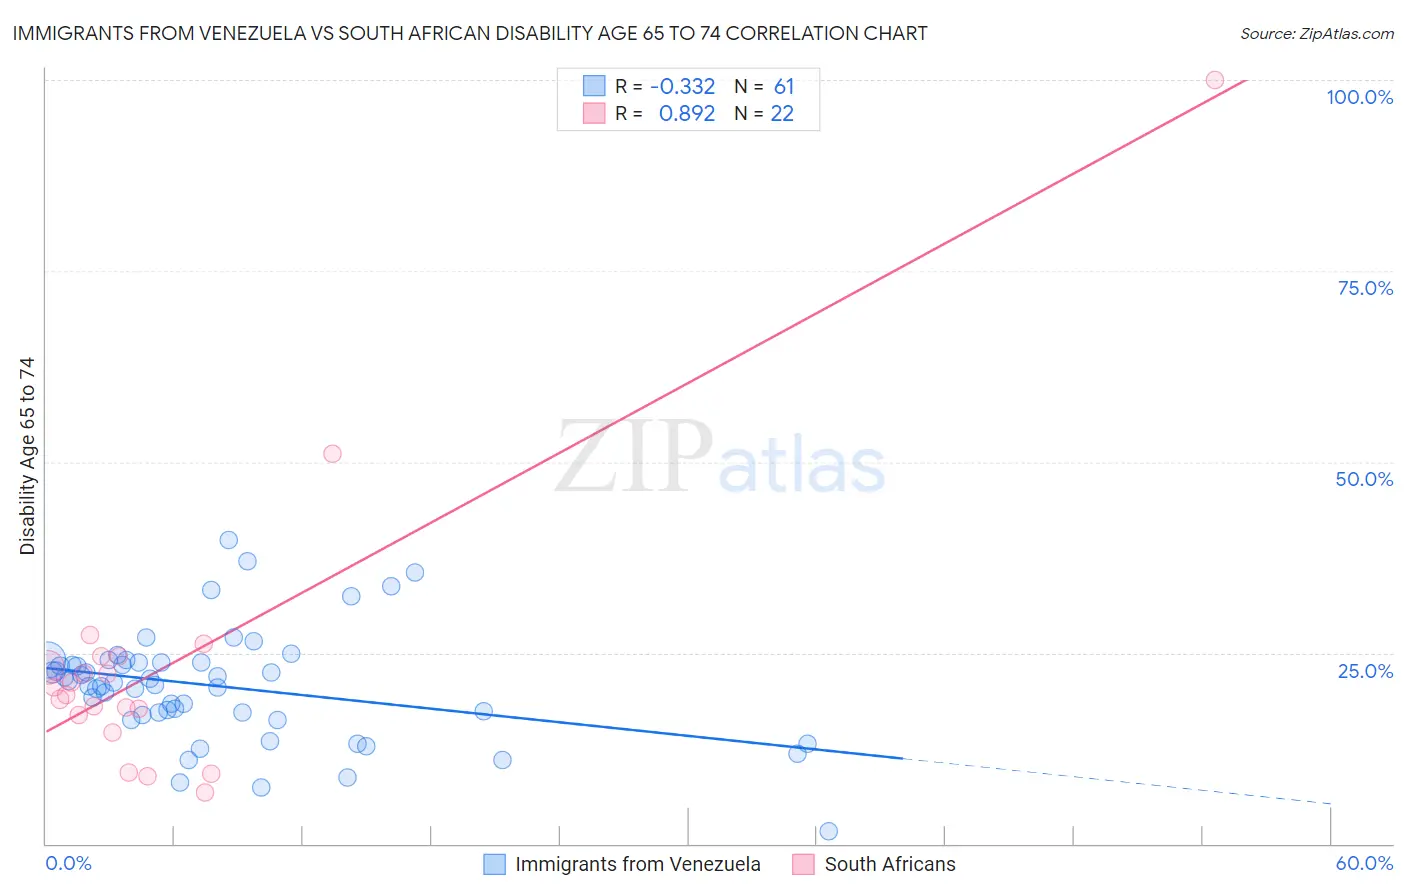 Immigrants from Venezuela vs South African Disability Age 65 to 74